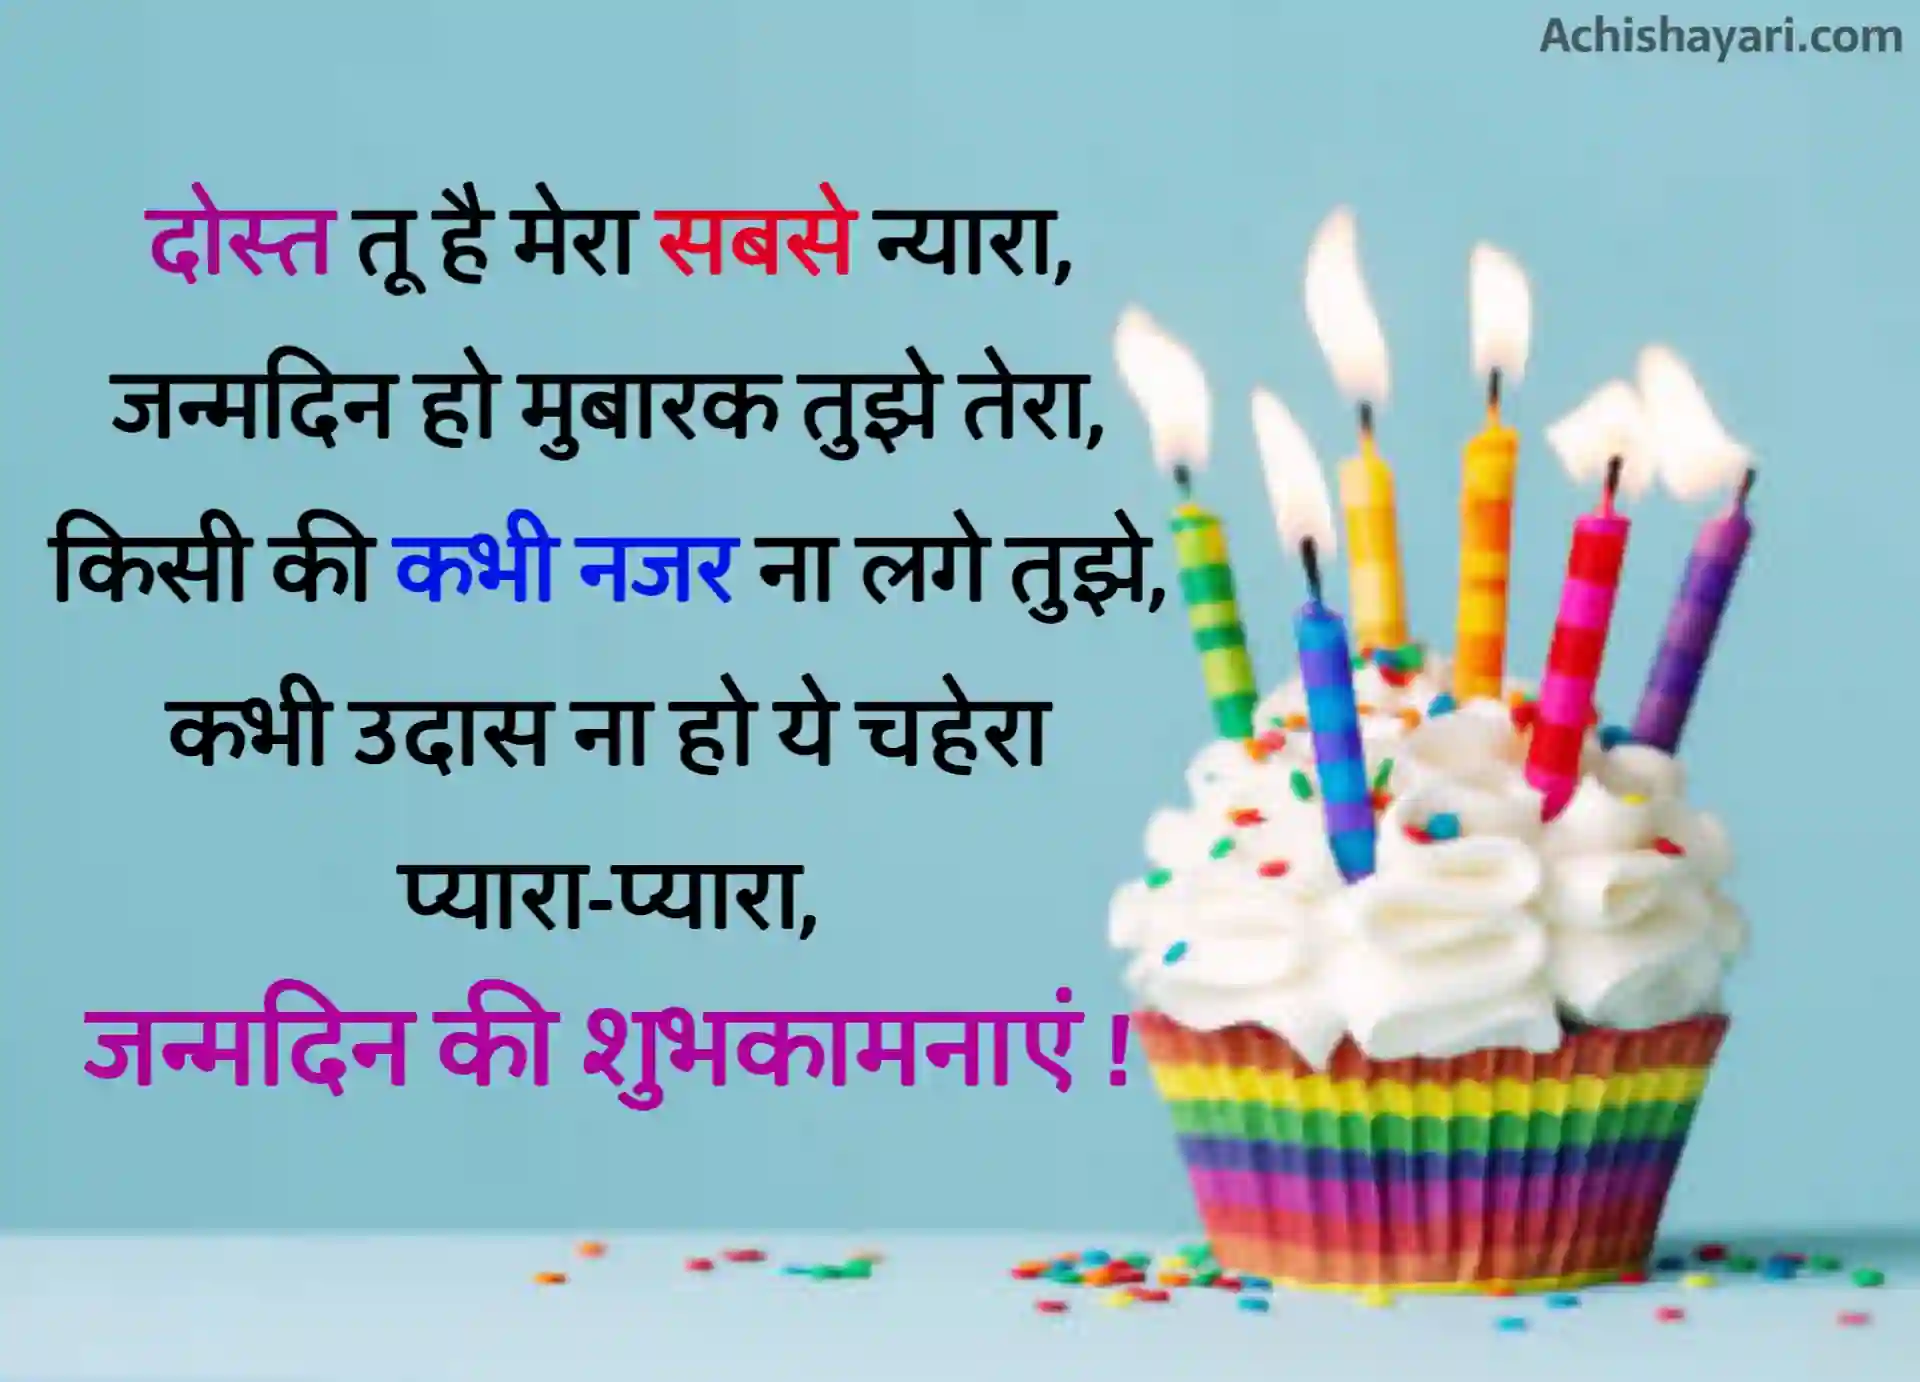 Birthday Wishes for Friend Image